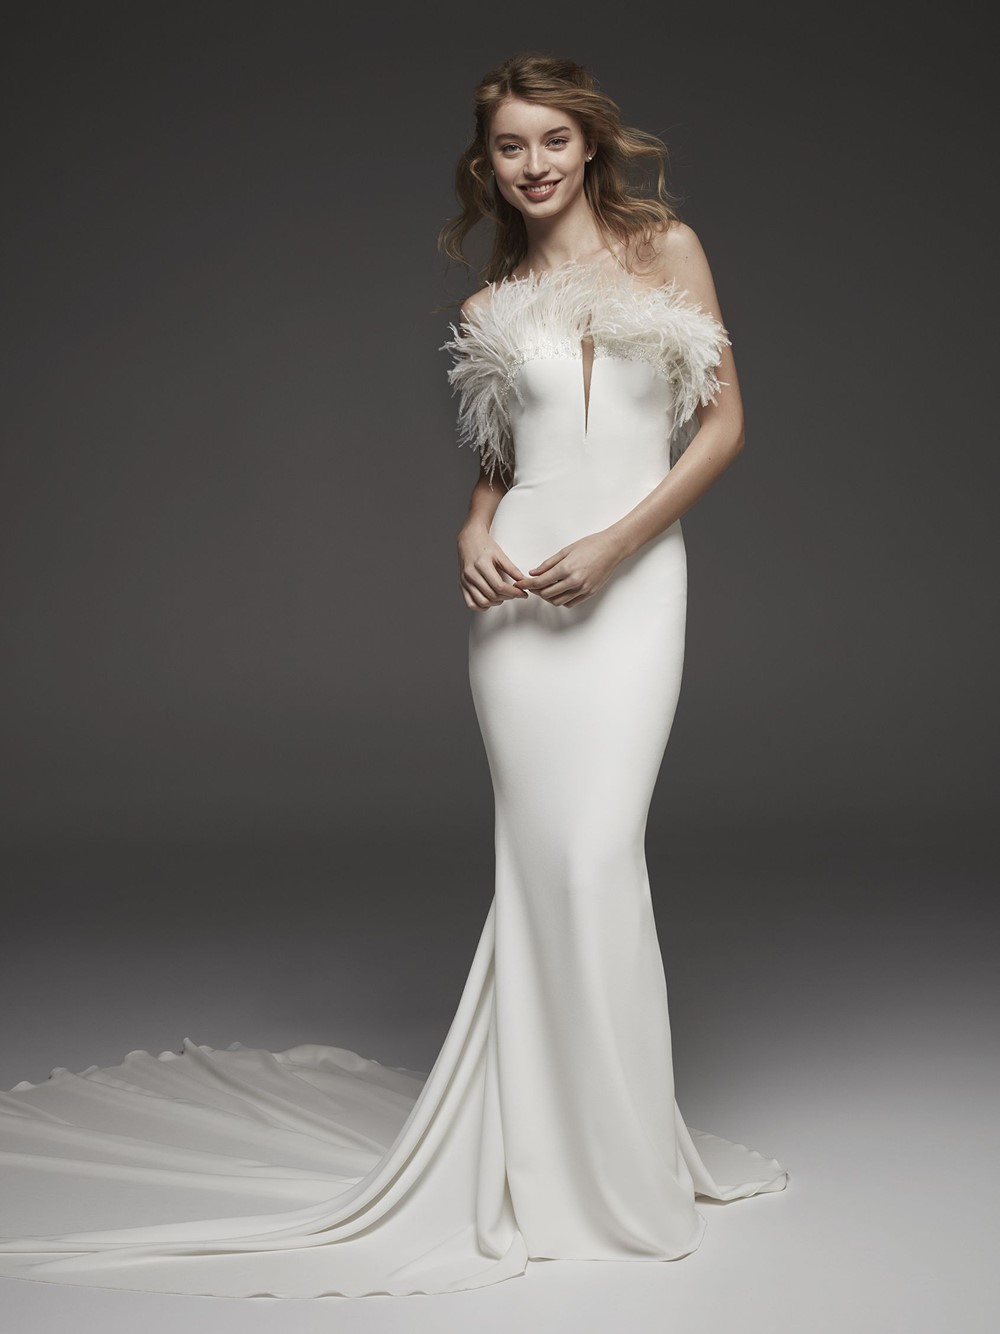 Top Bridal Trends for 2019 - Feathers Pronovias HERAS 2019 Bridal